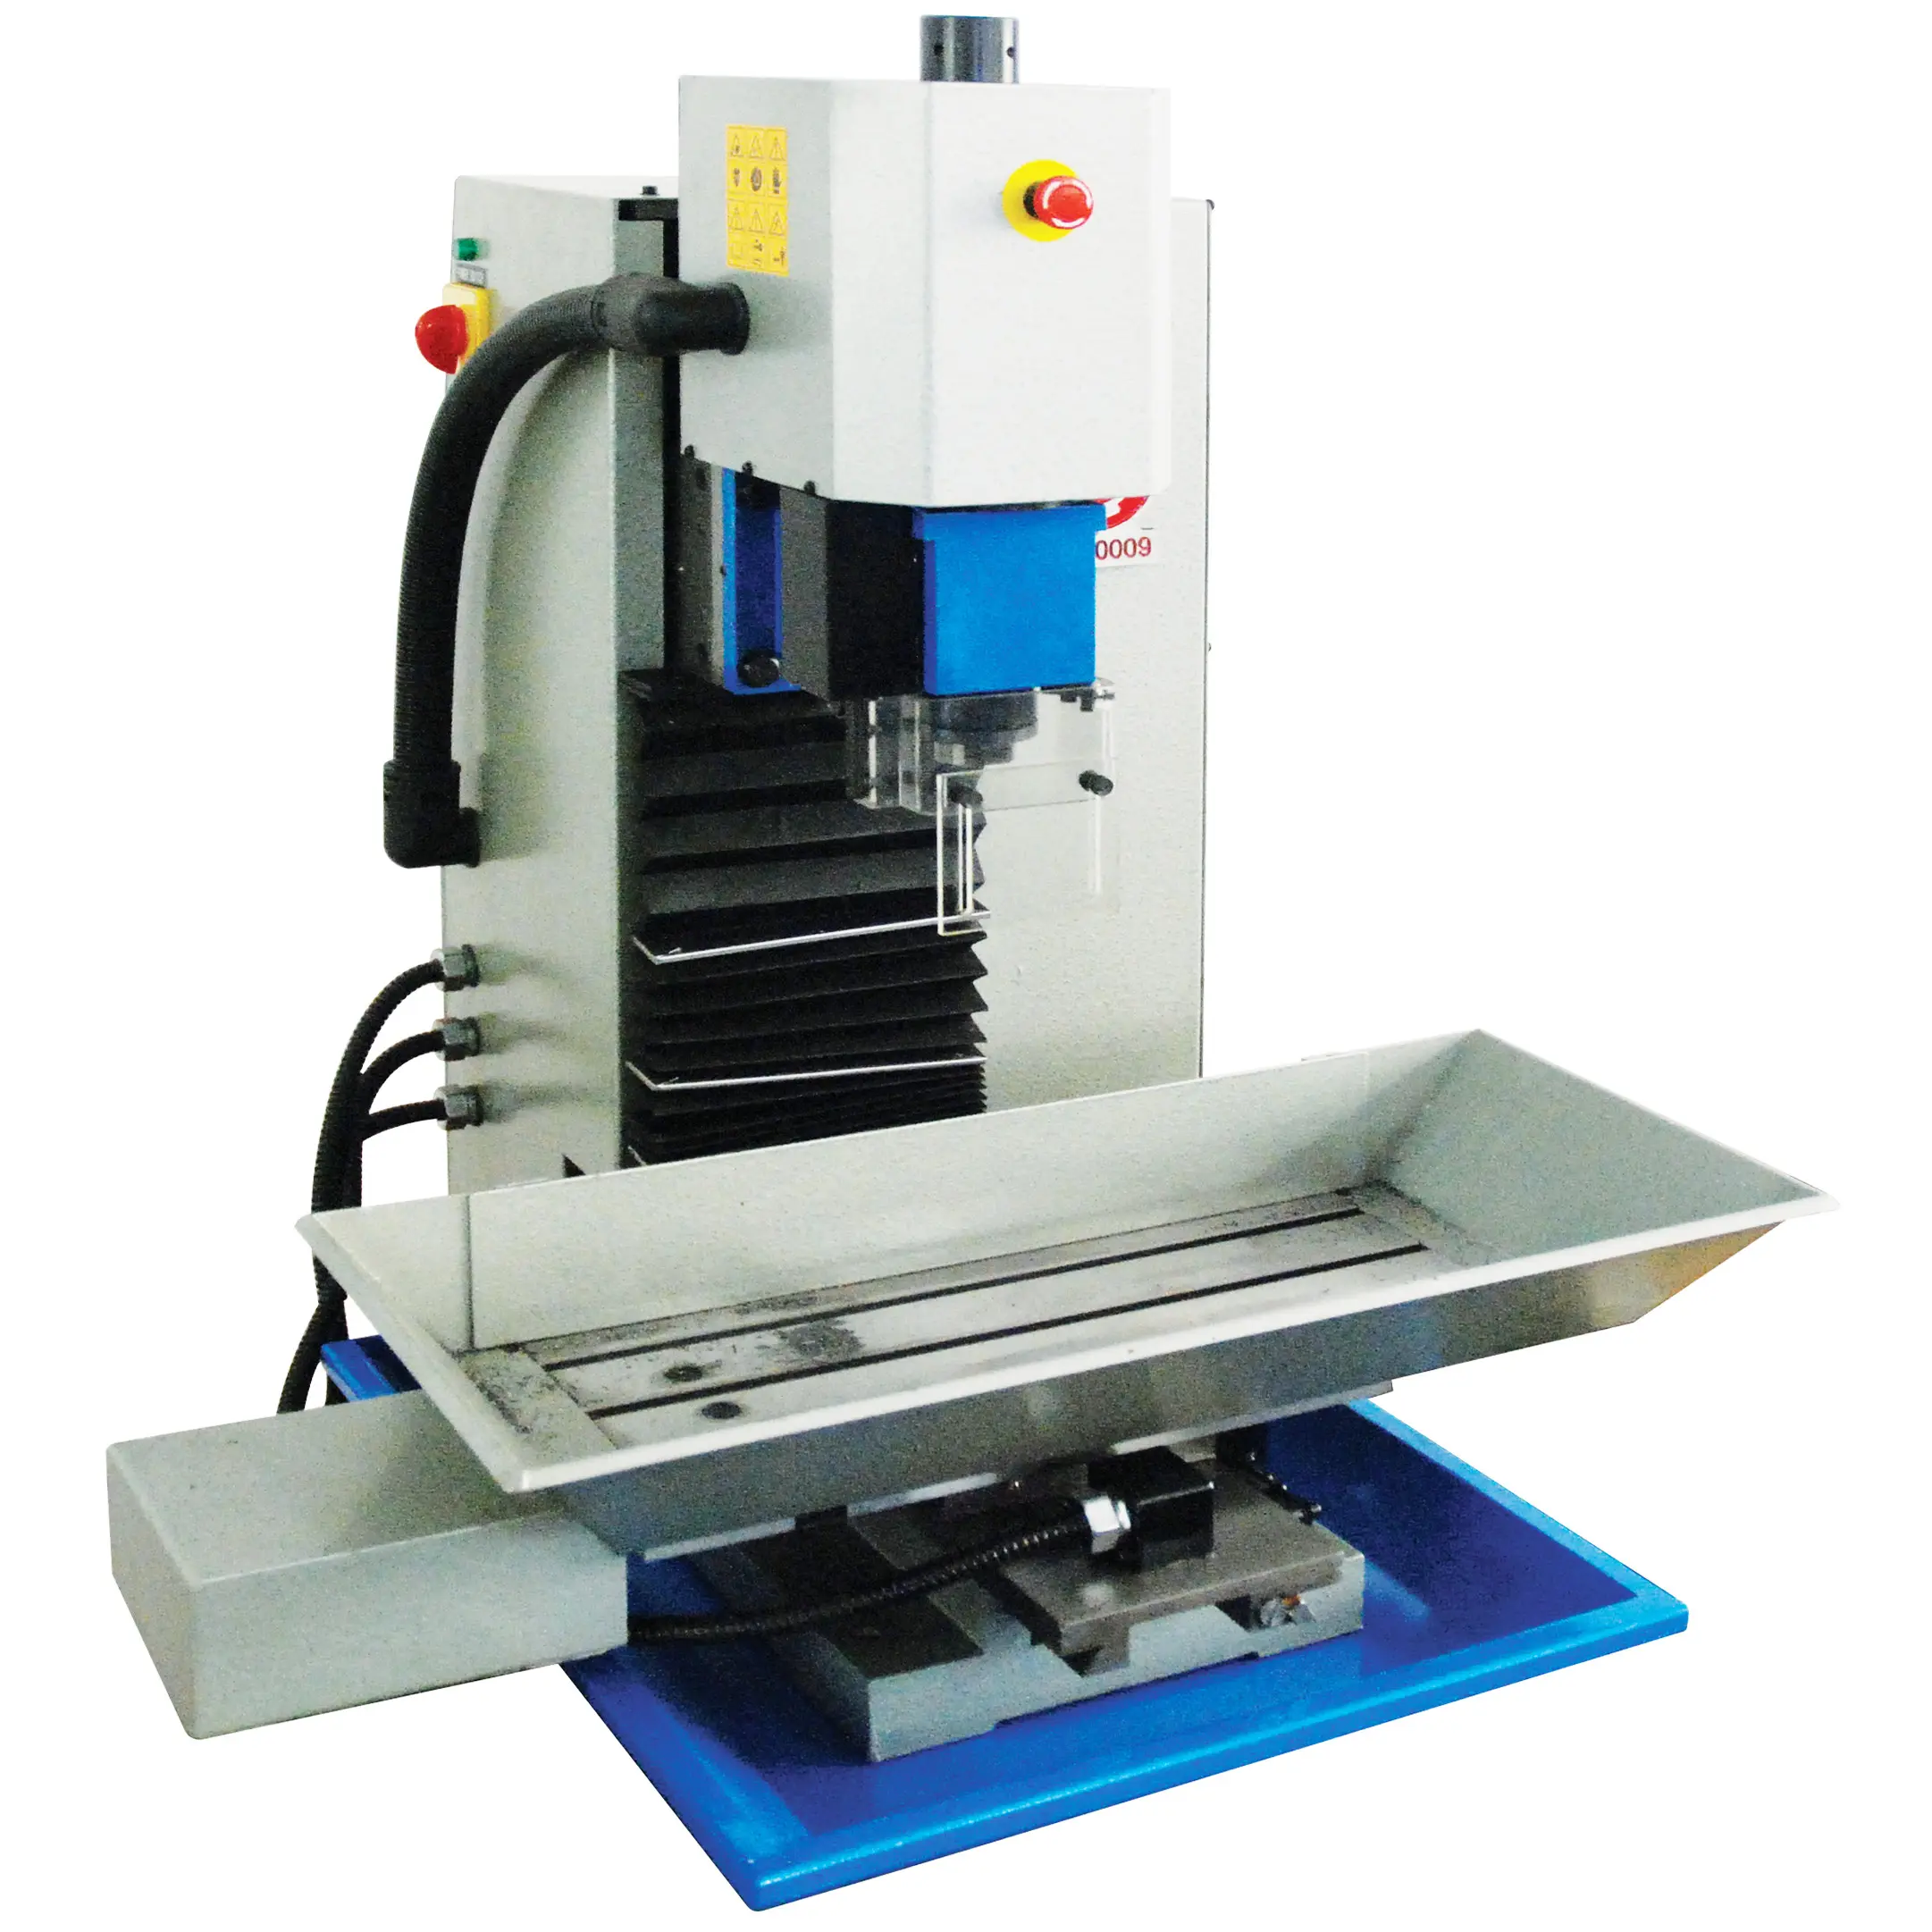 Vertical Low Cost 5 axis used milling machine